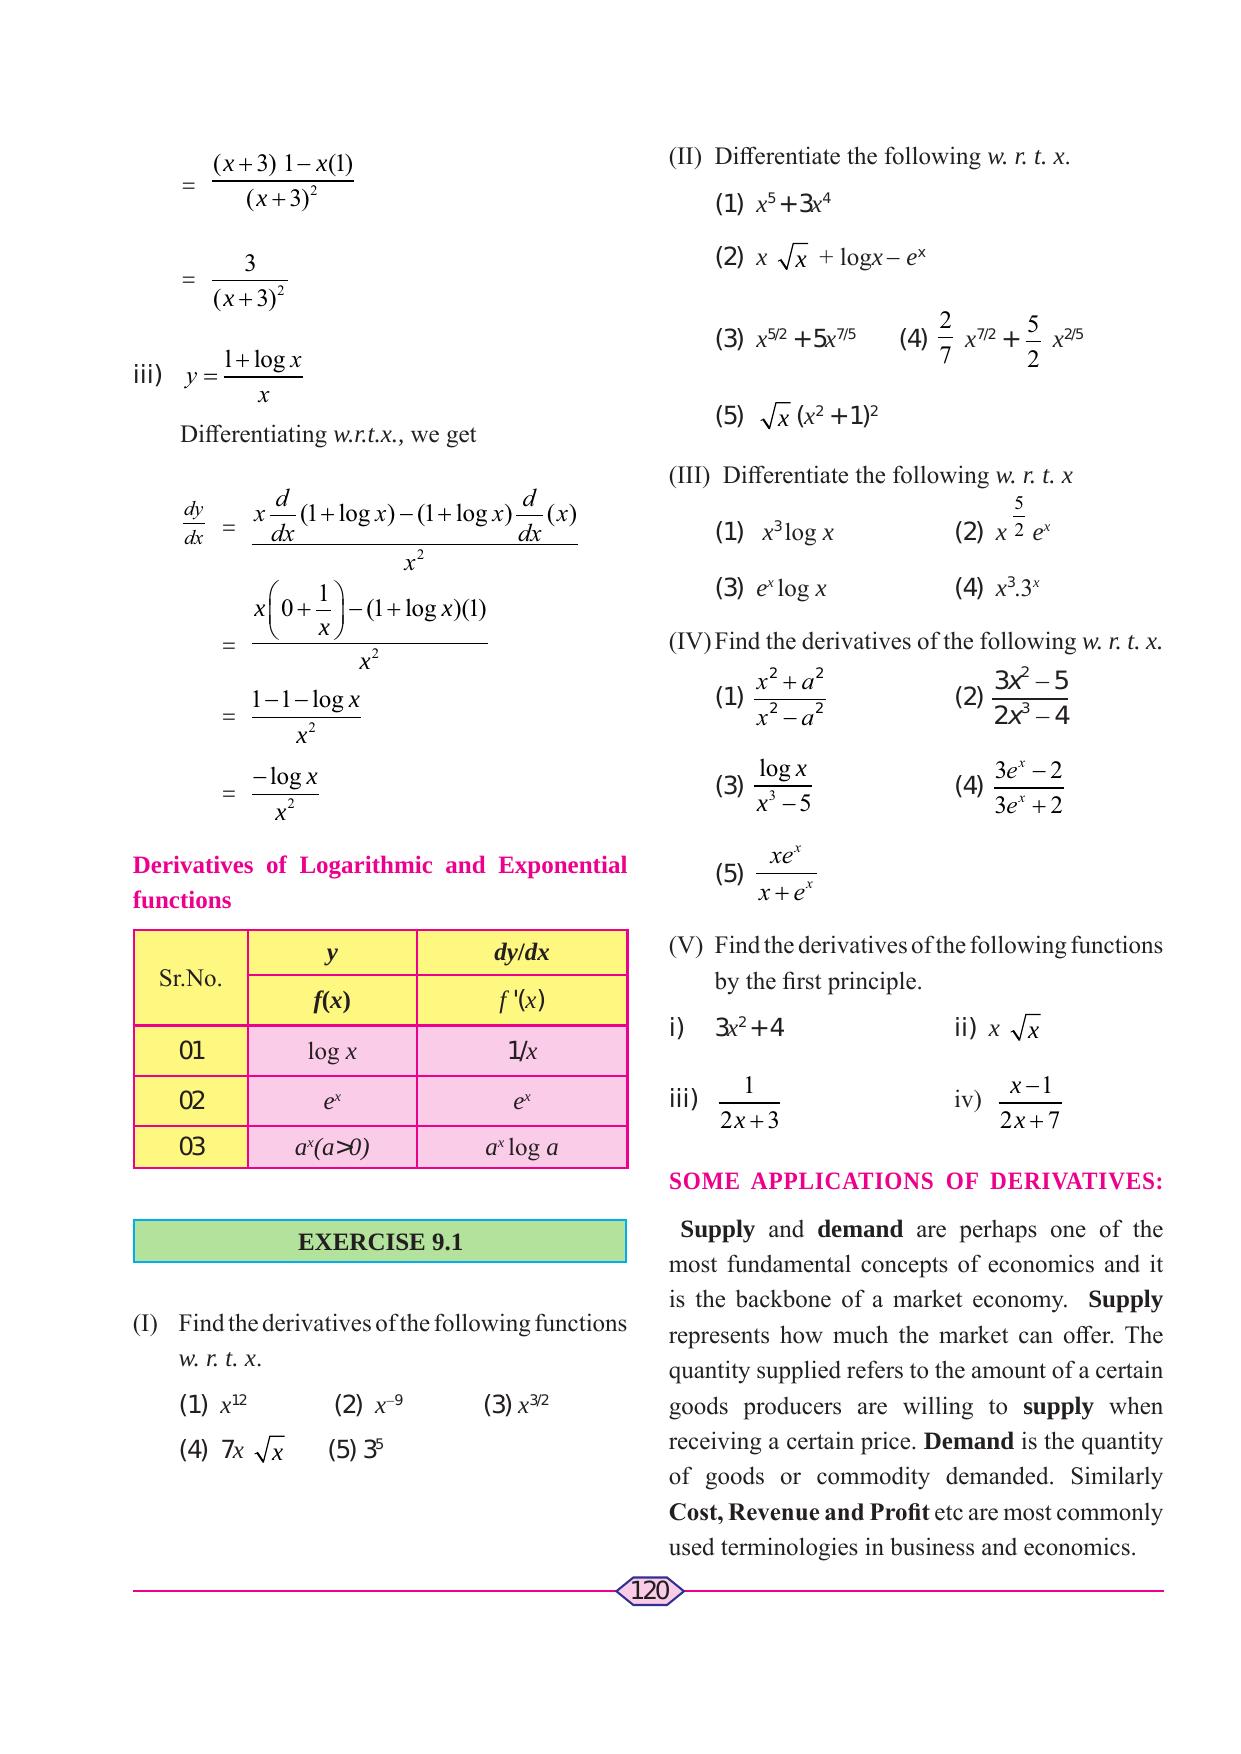 Maharashtra Board Class 11 Maths (Commerce) (Part 1) Textbook - Page 130